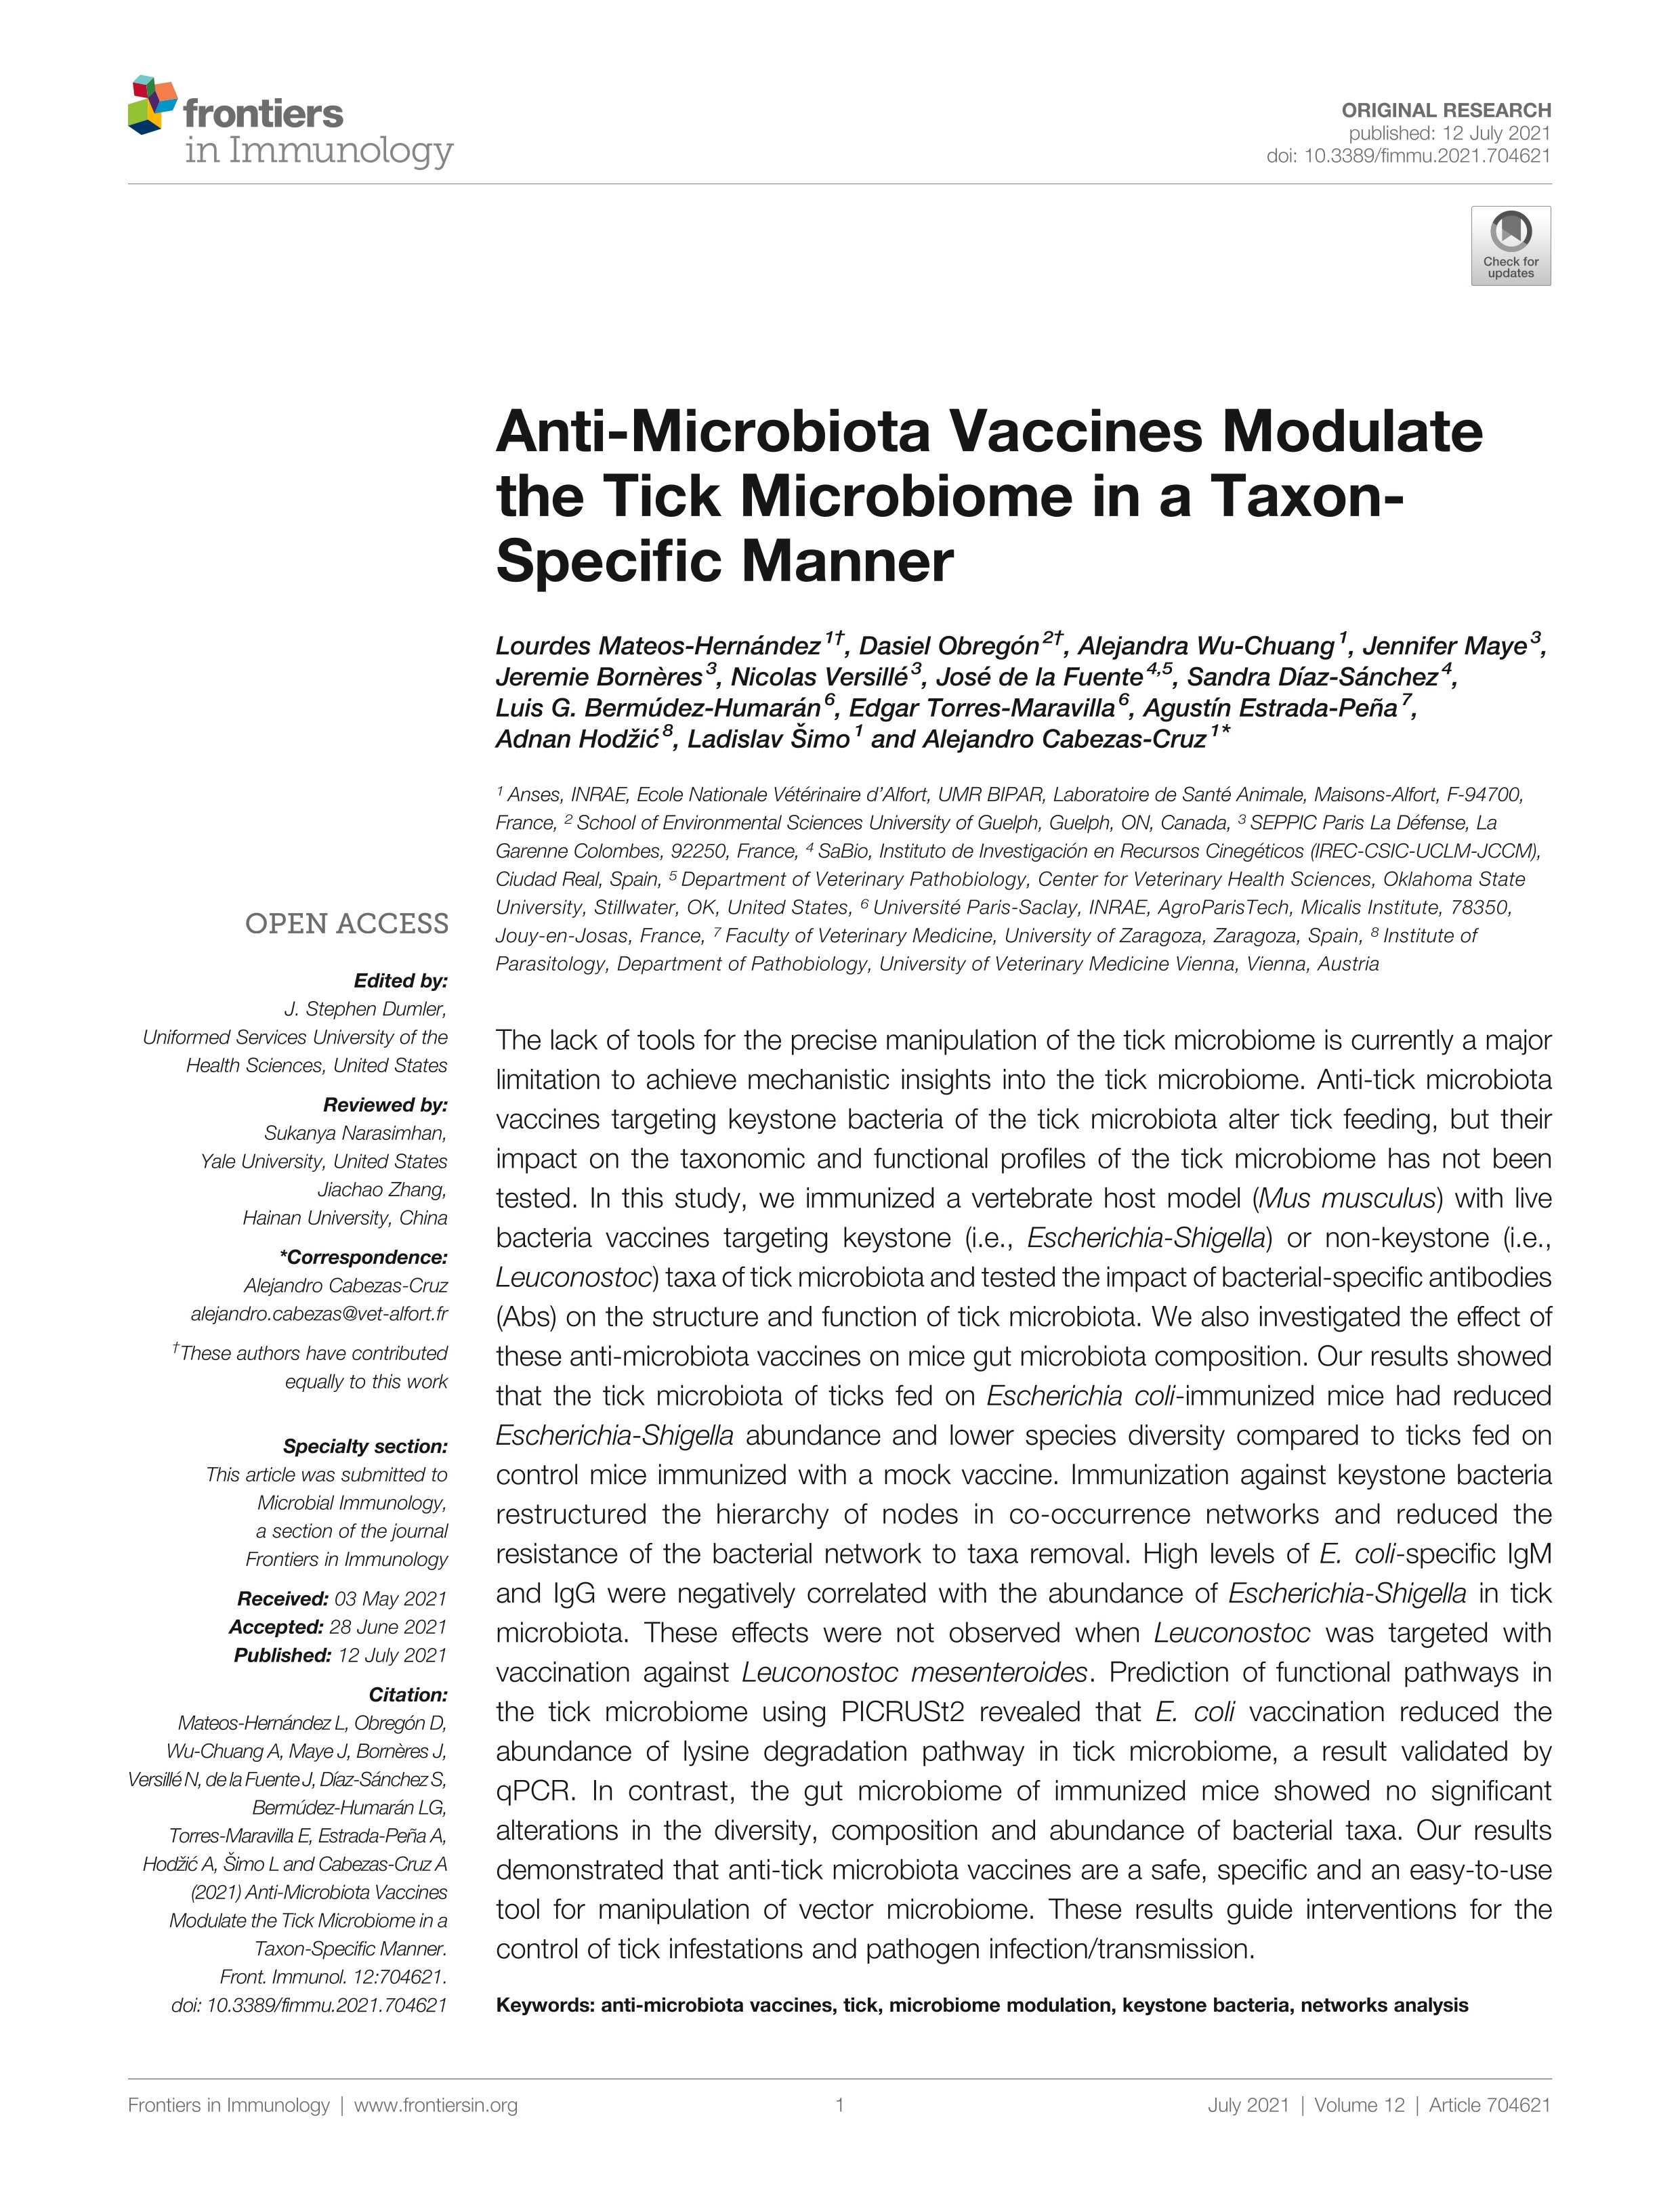 Anti-microbiota vaccines modulate the tick microbiome in a taxon-specific manner